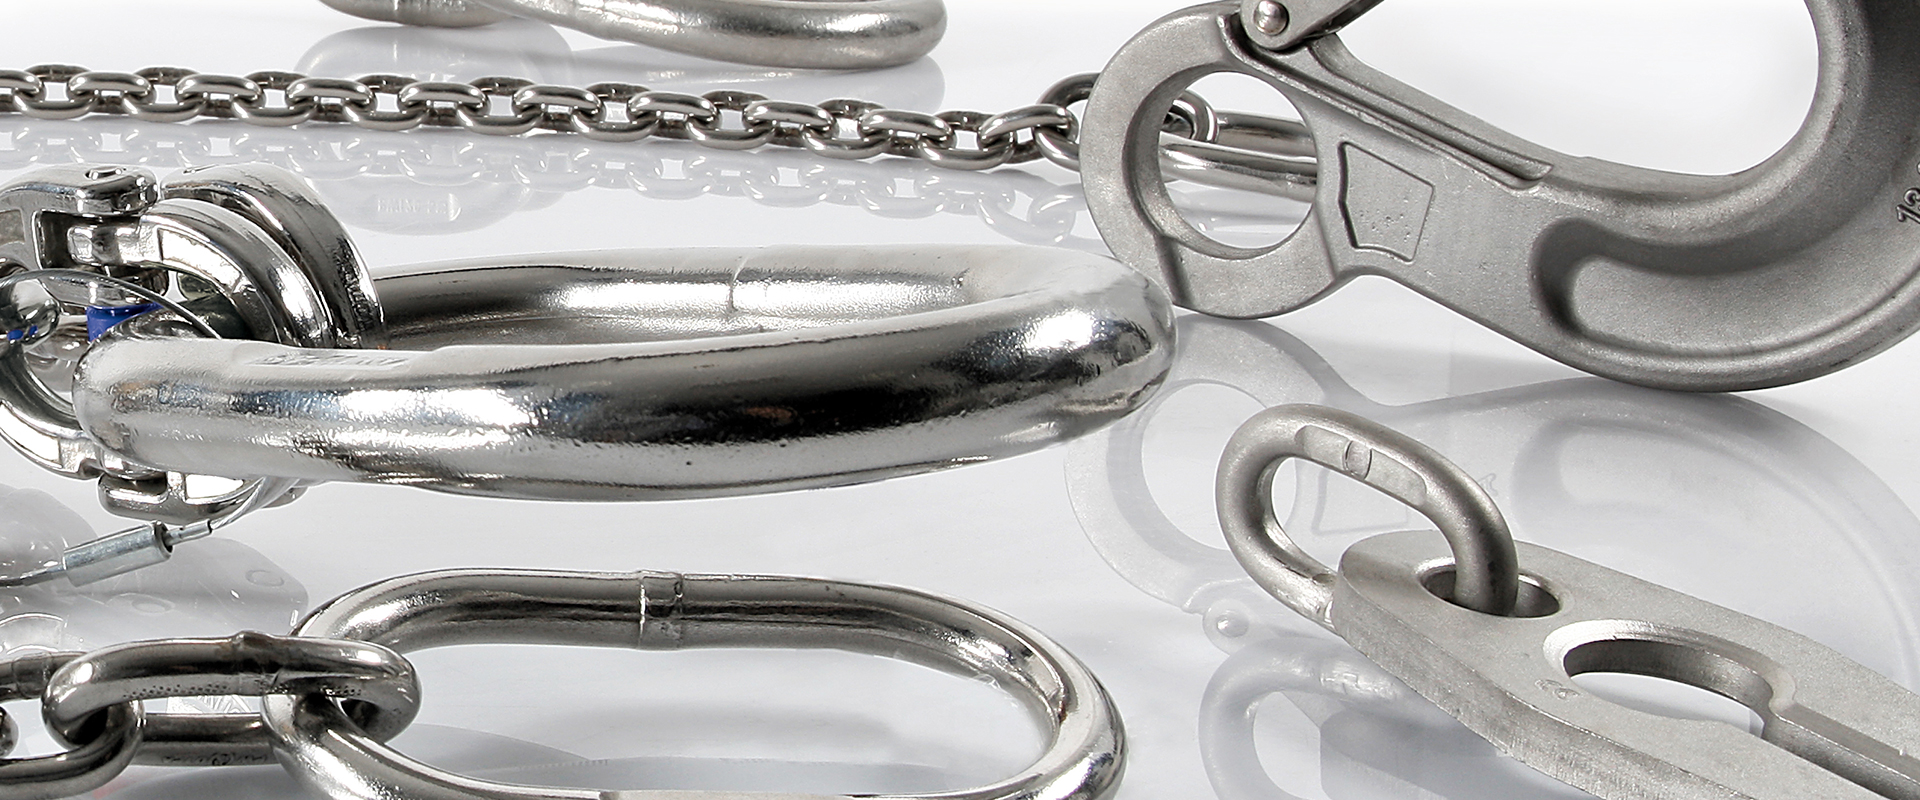 Stainless Chains